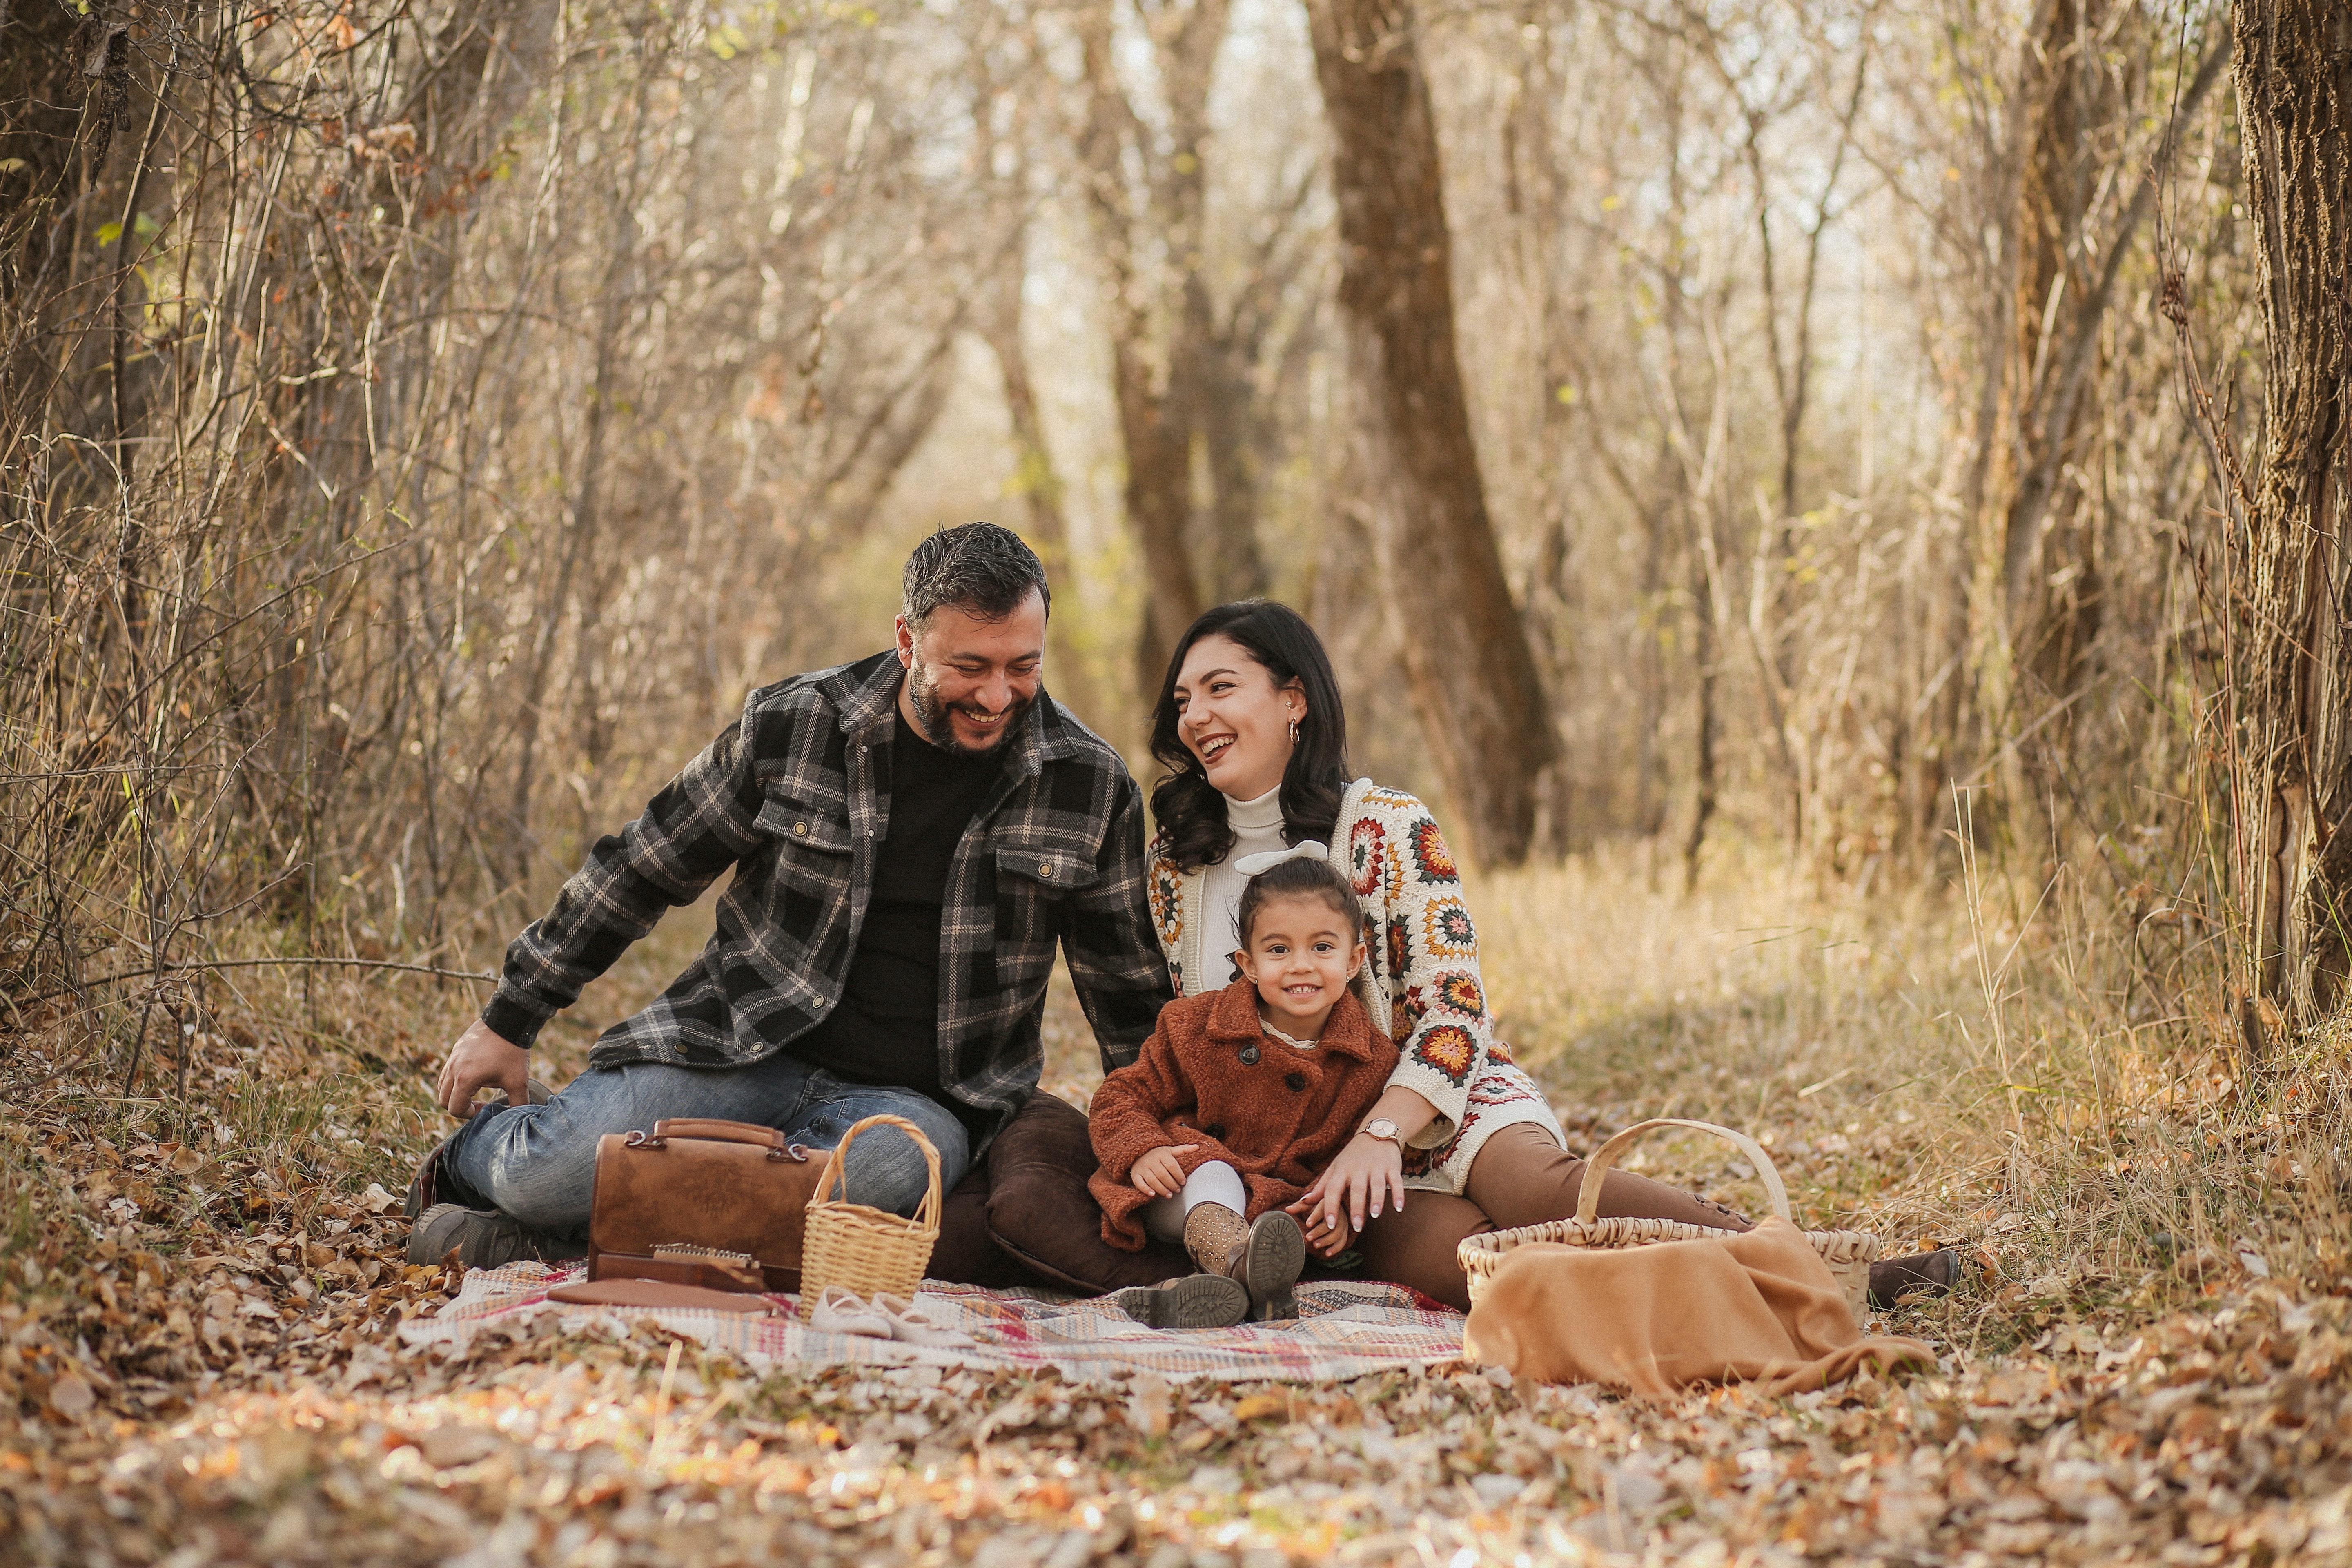 Smiling family having a picnic in an outdoor foresty area